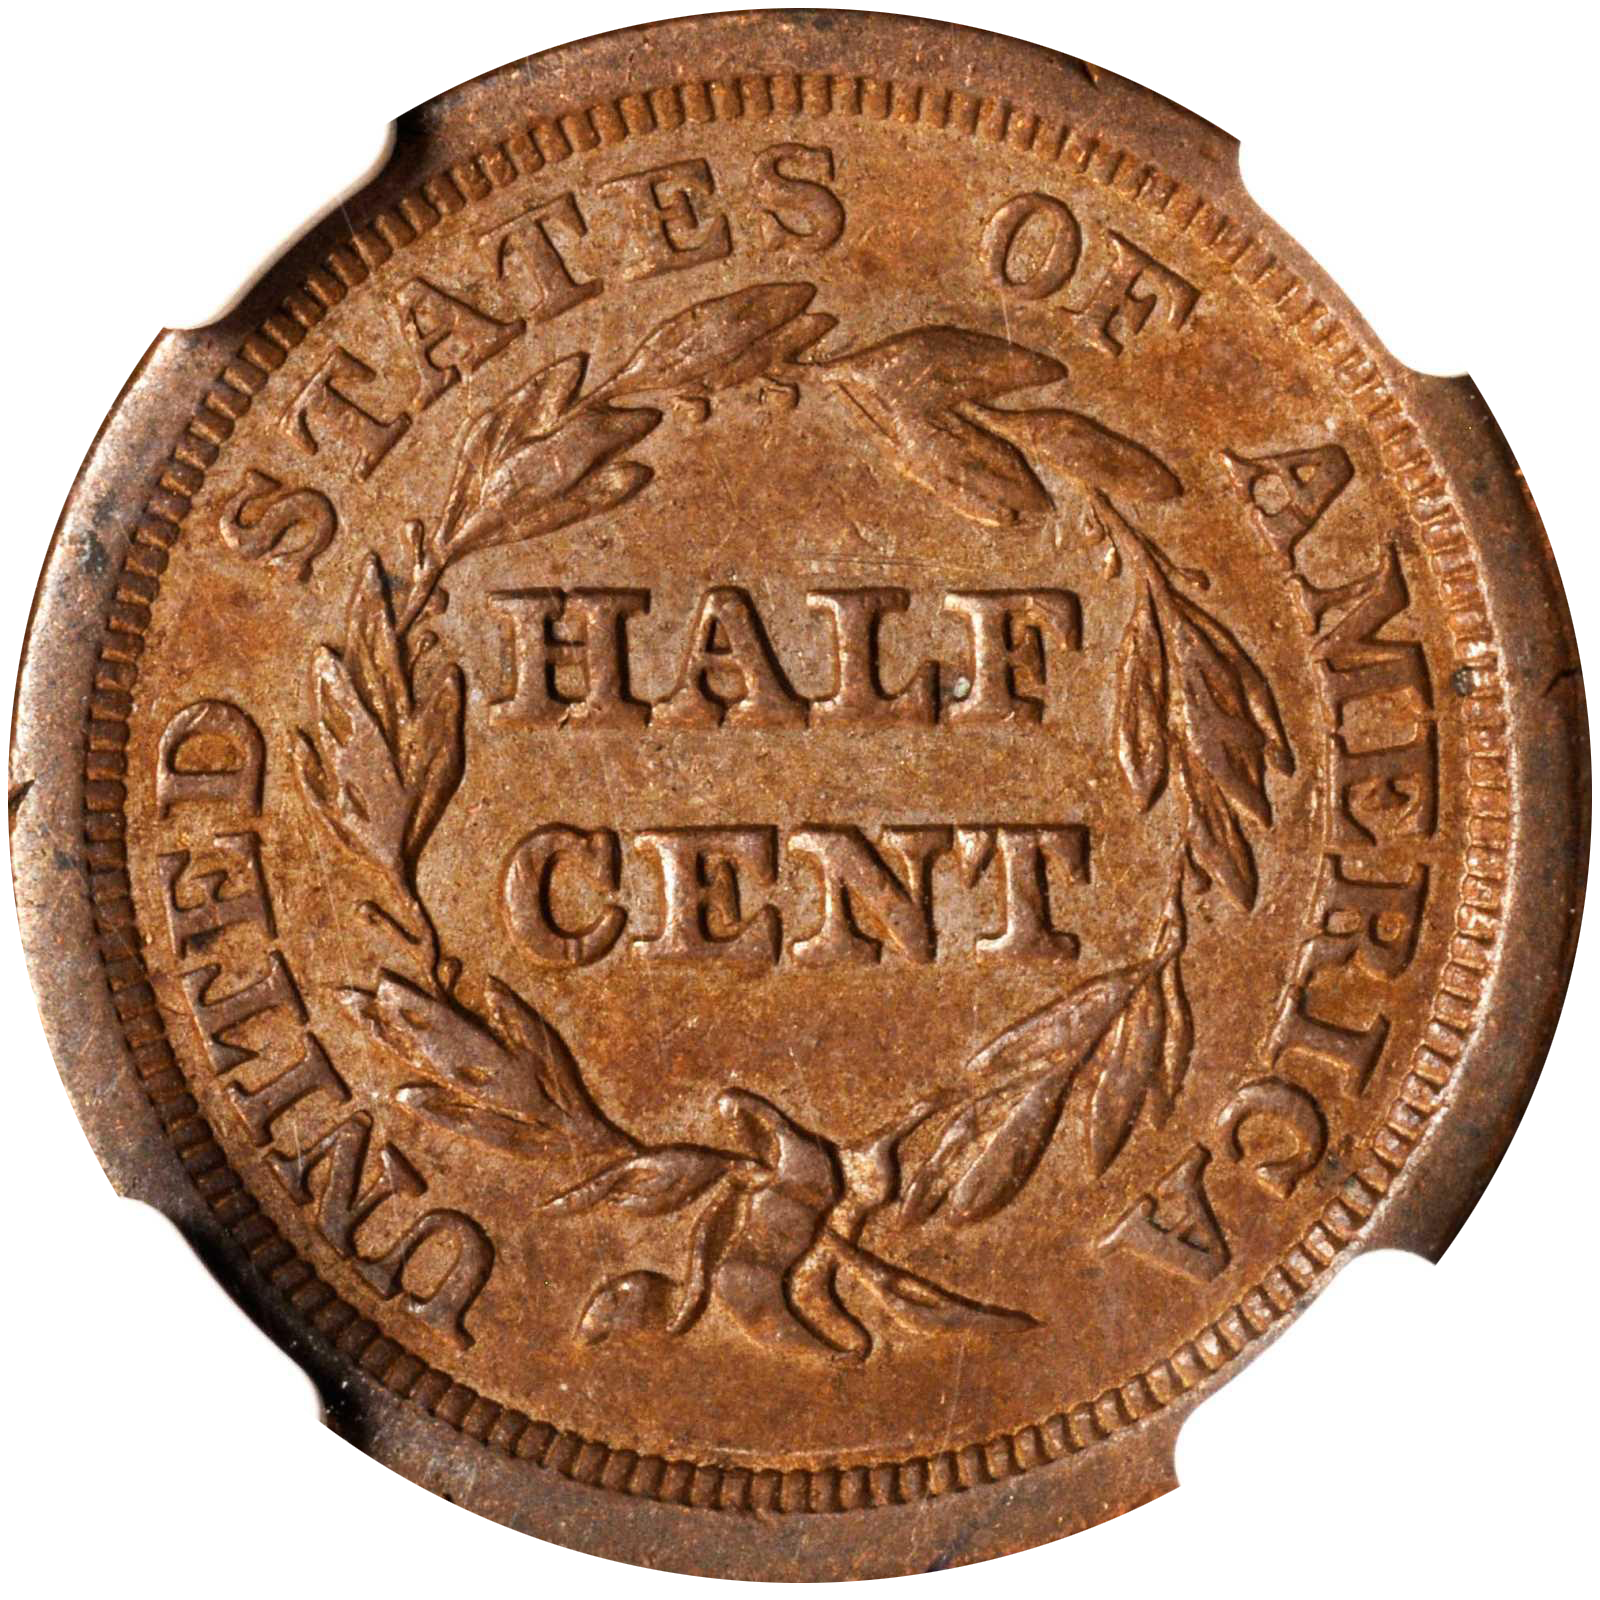 1851 US Half Cent Braided Hair AU Almost Uncirculated Rare Copper